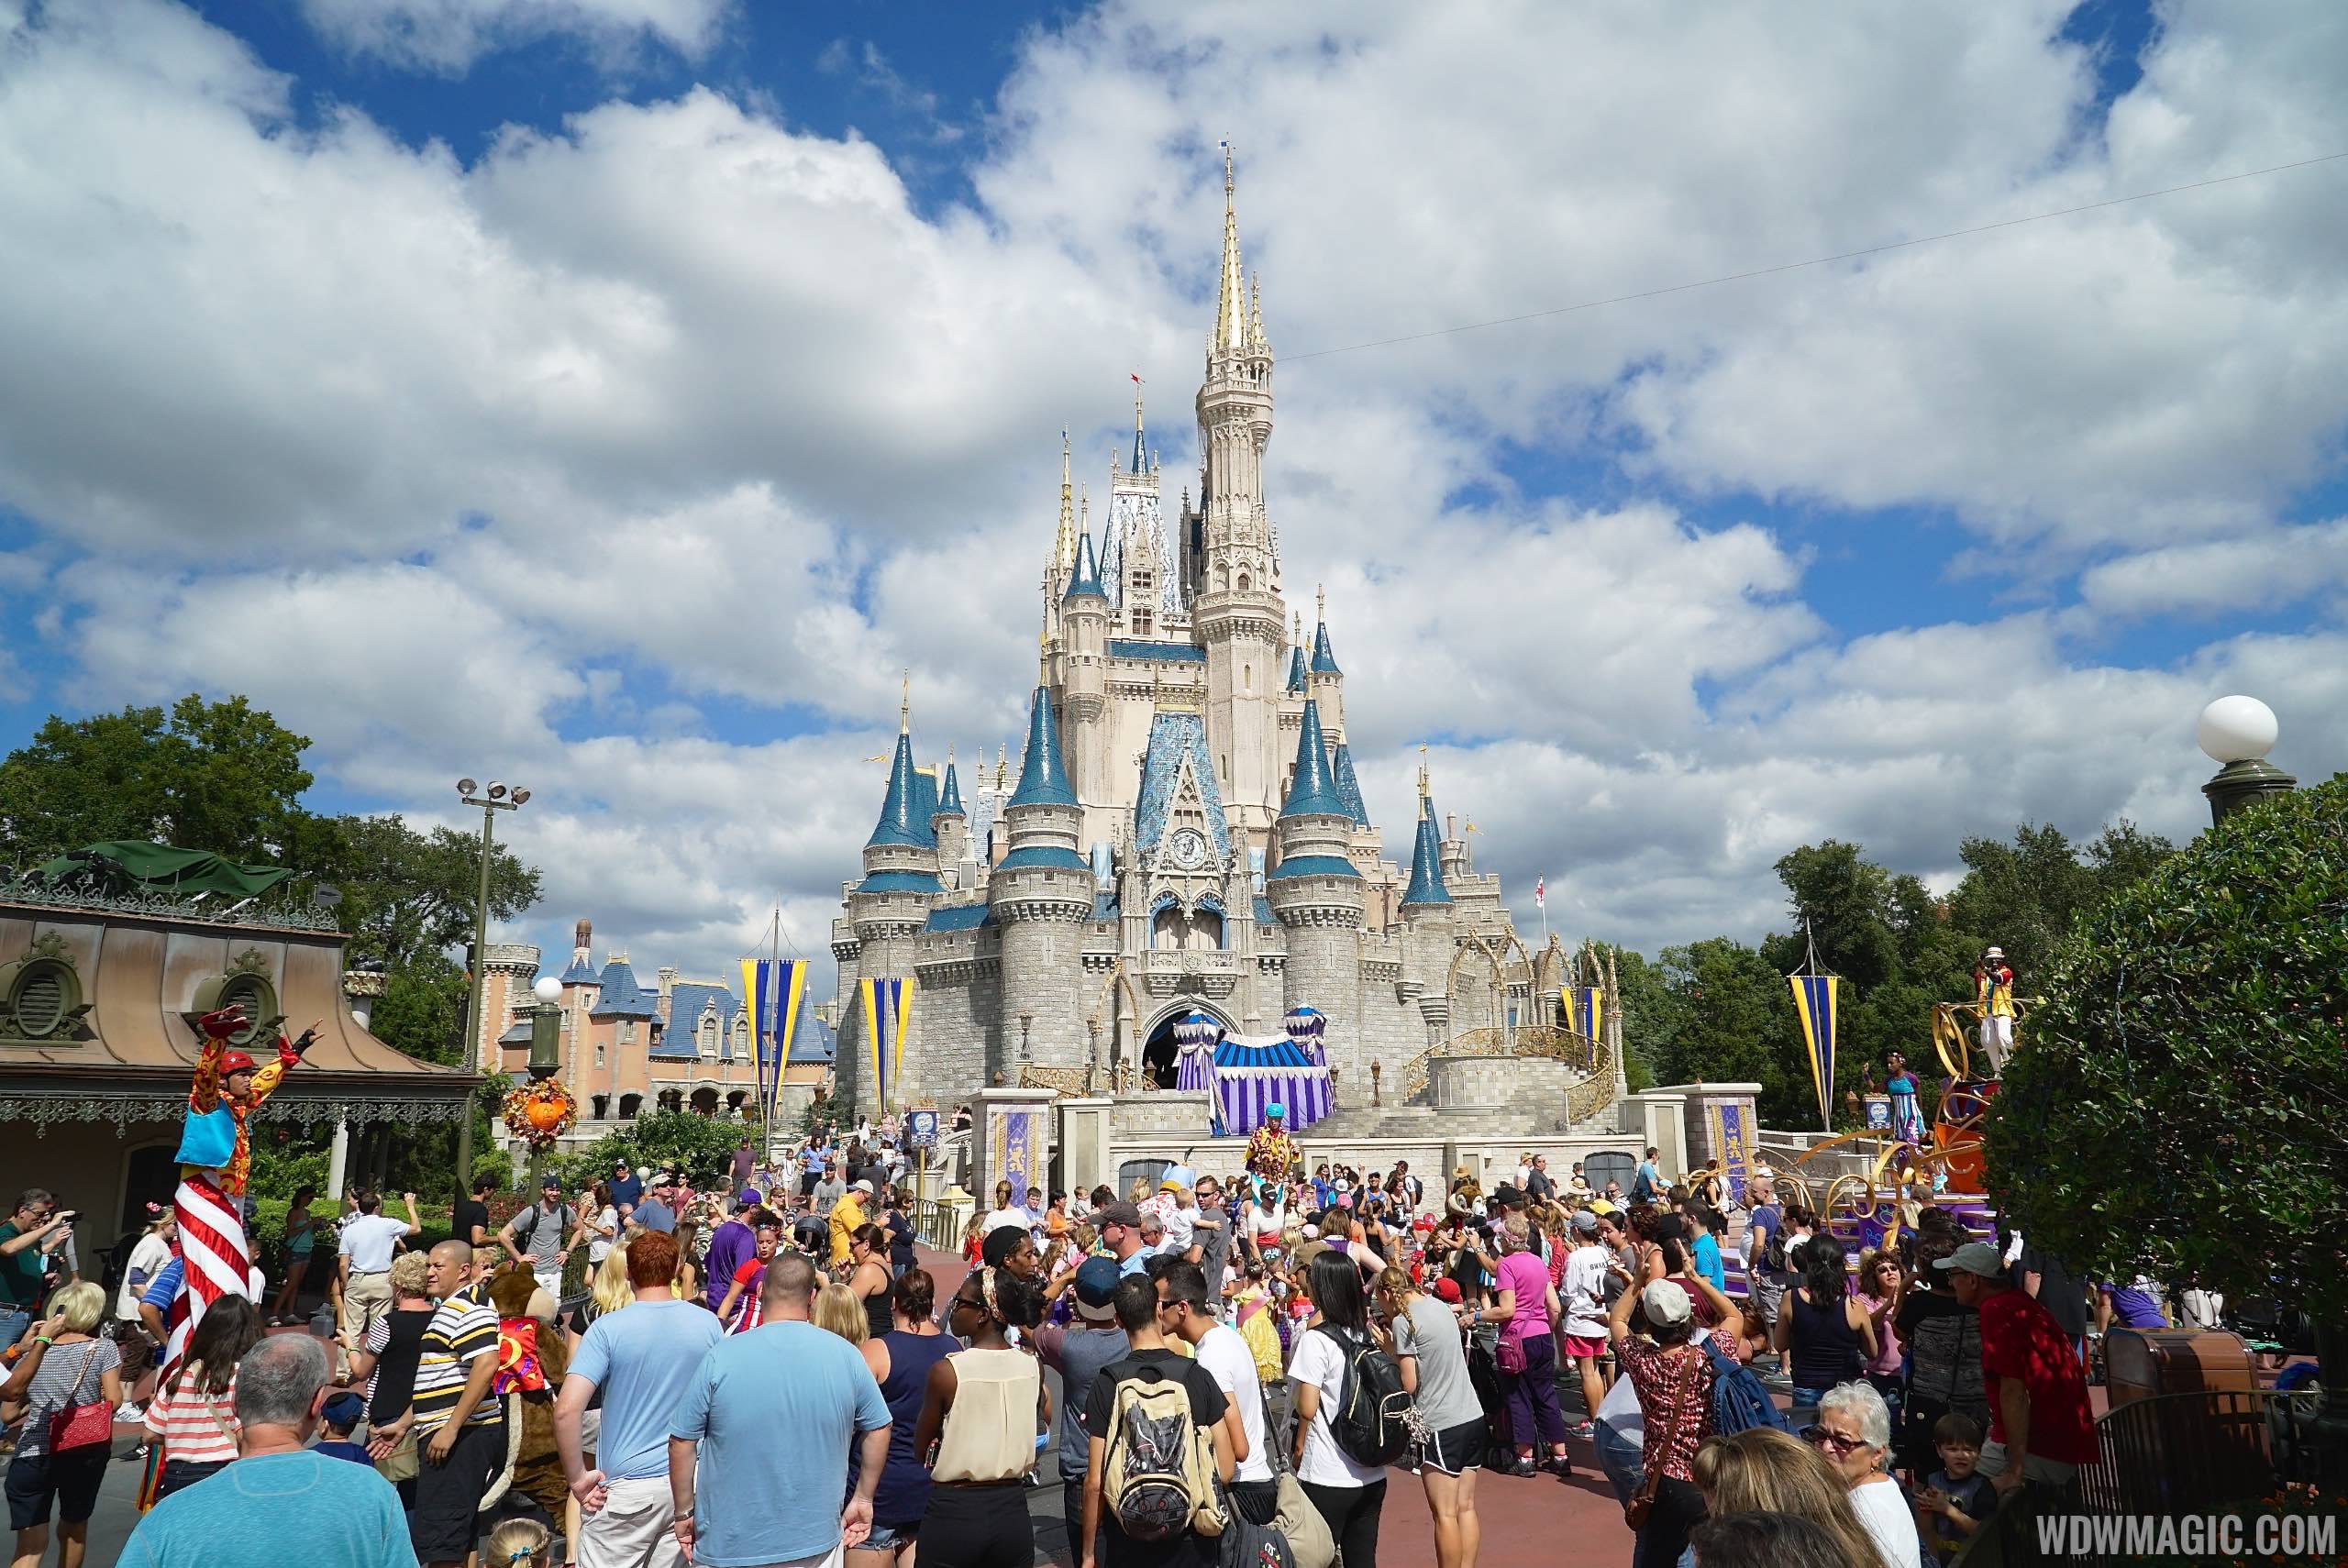 Disney officially announces updates to Move It, Shake It, Celebrate It! Street Party